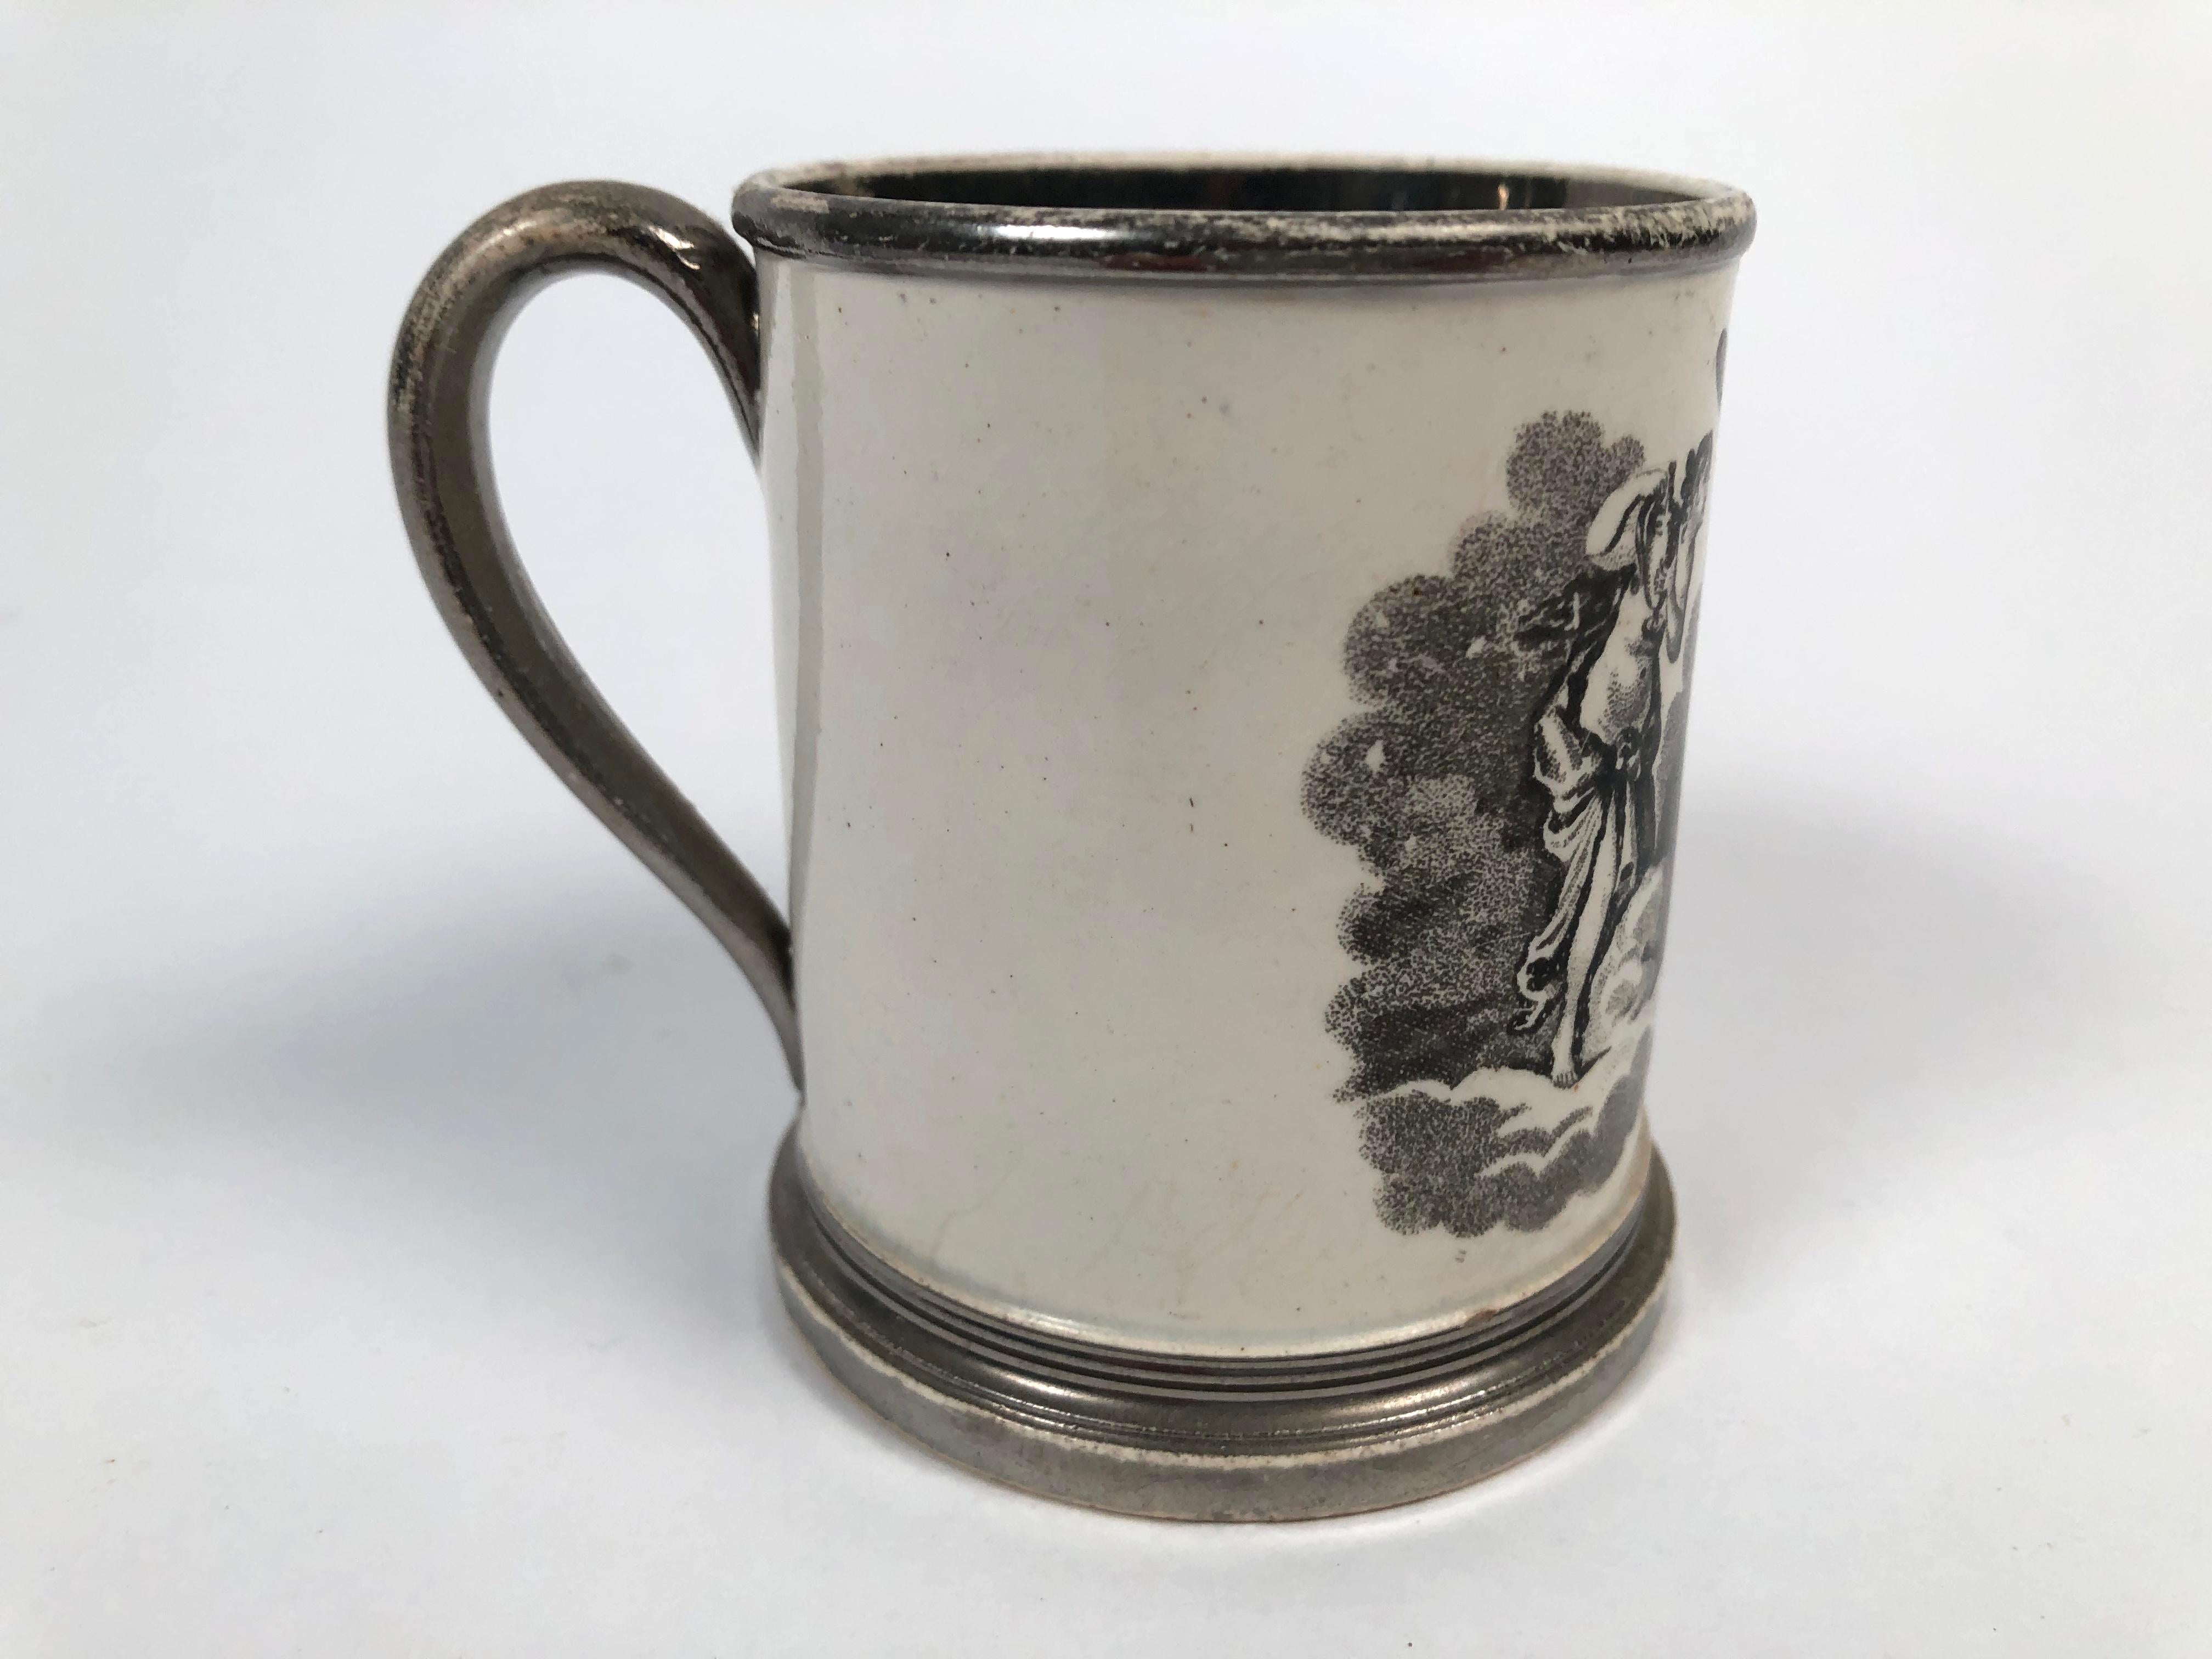 Glazed English Staffordshire Pottery Child's Cup a Reward for Industry